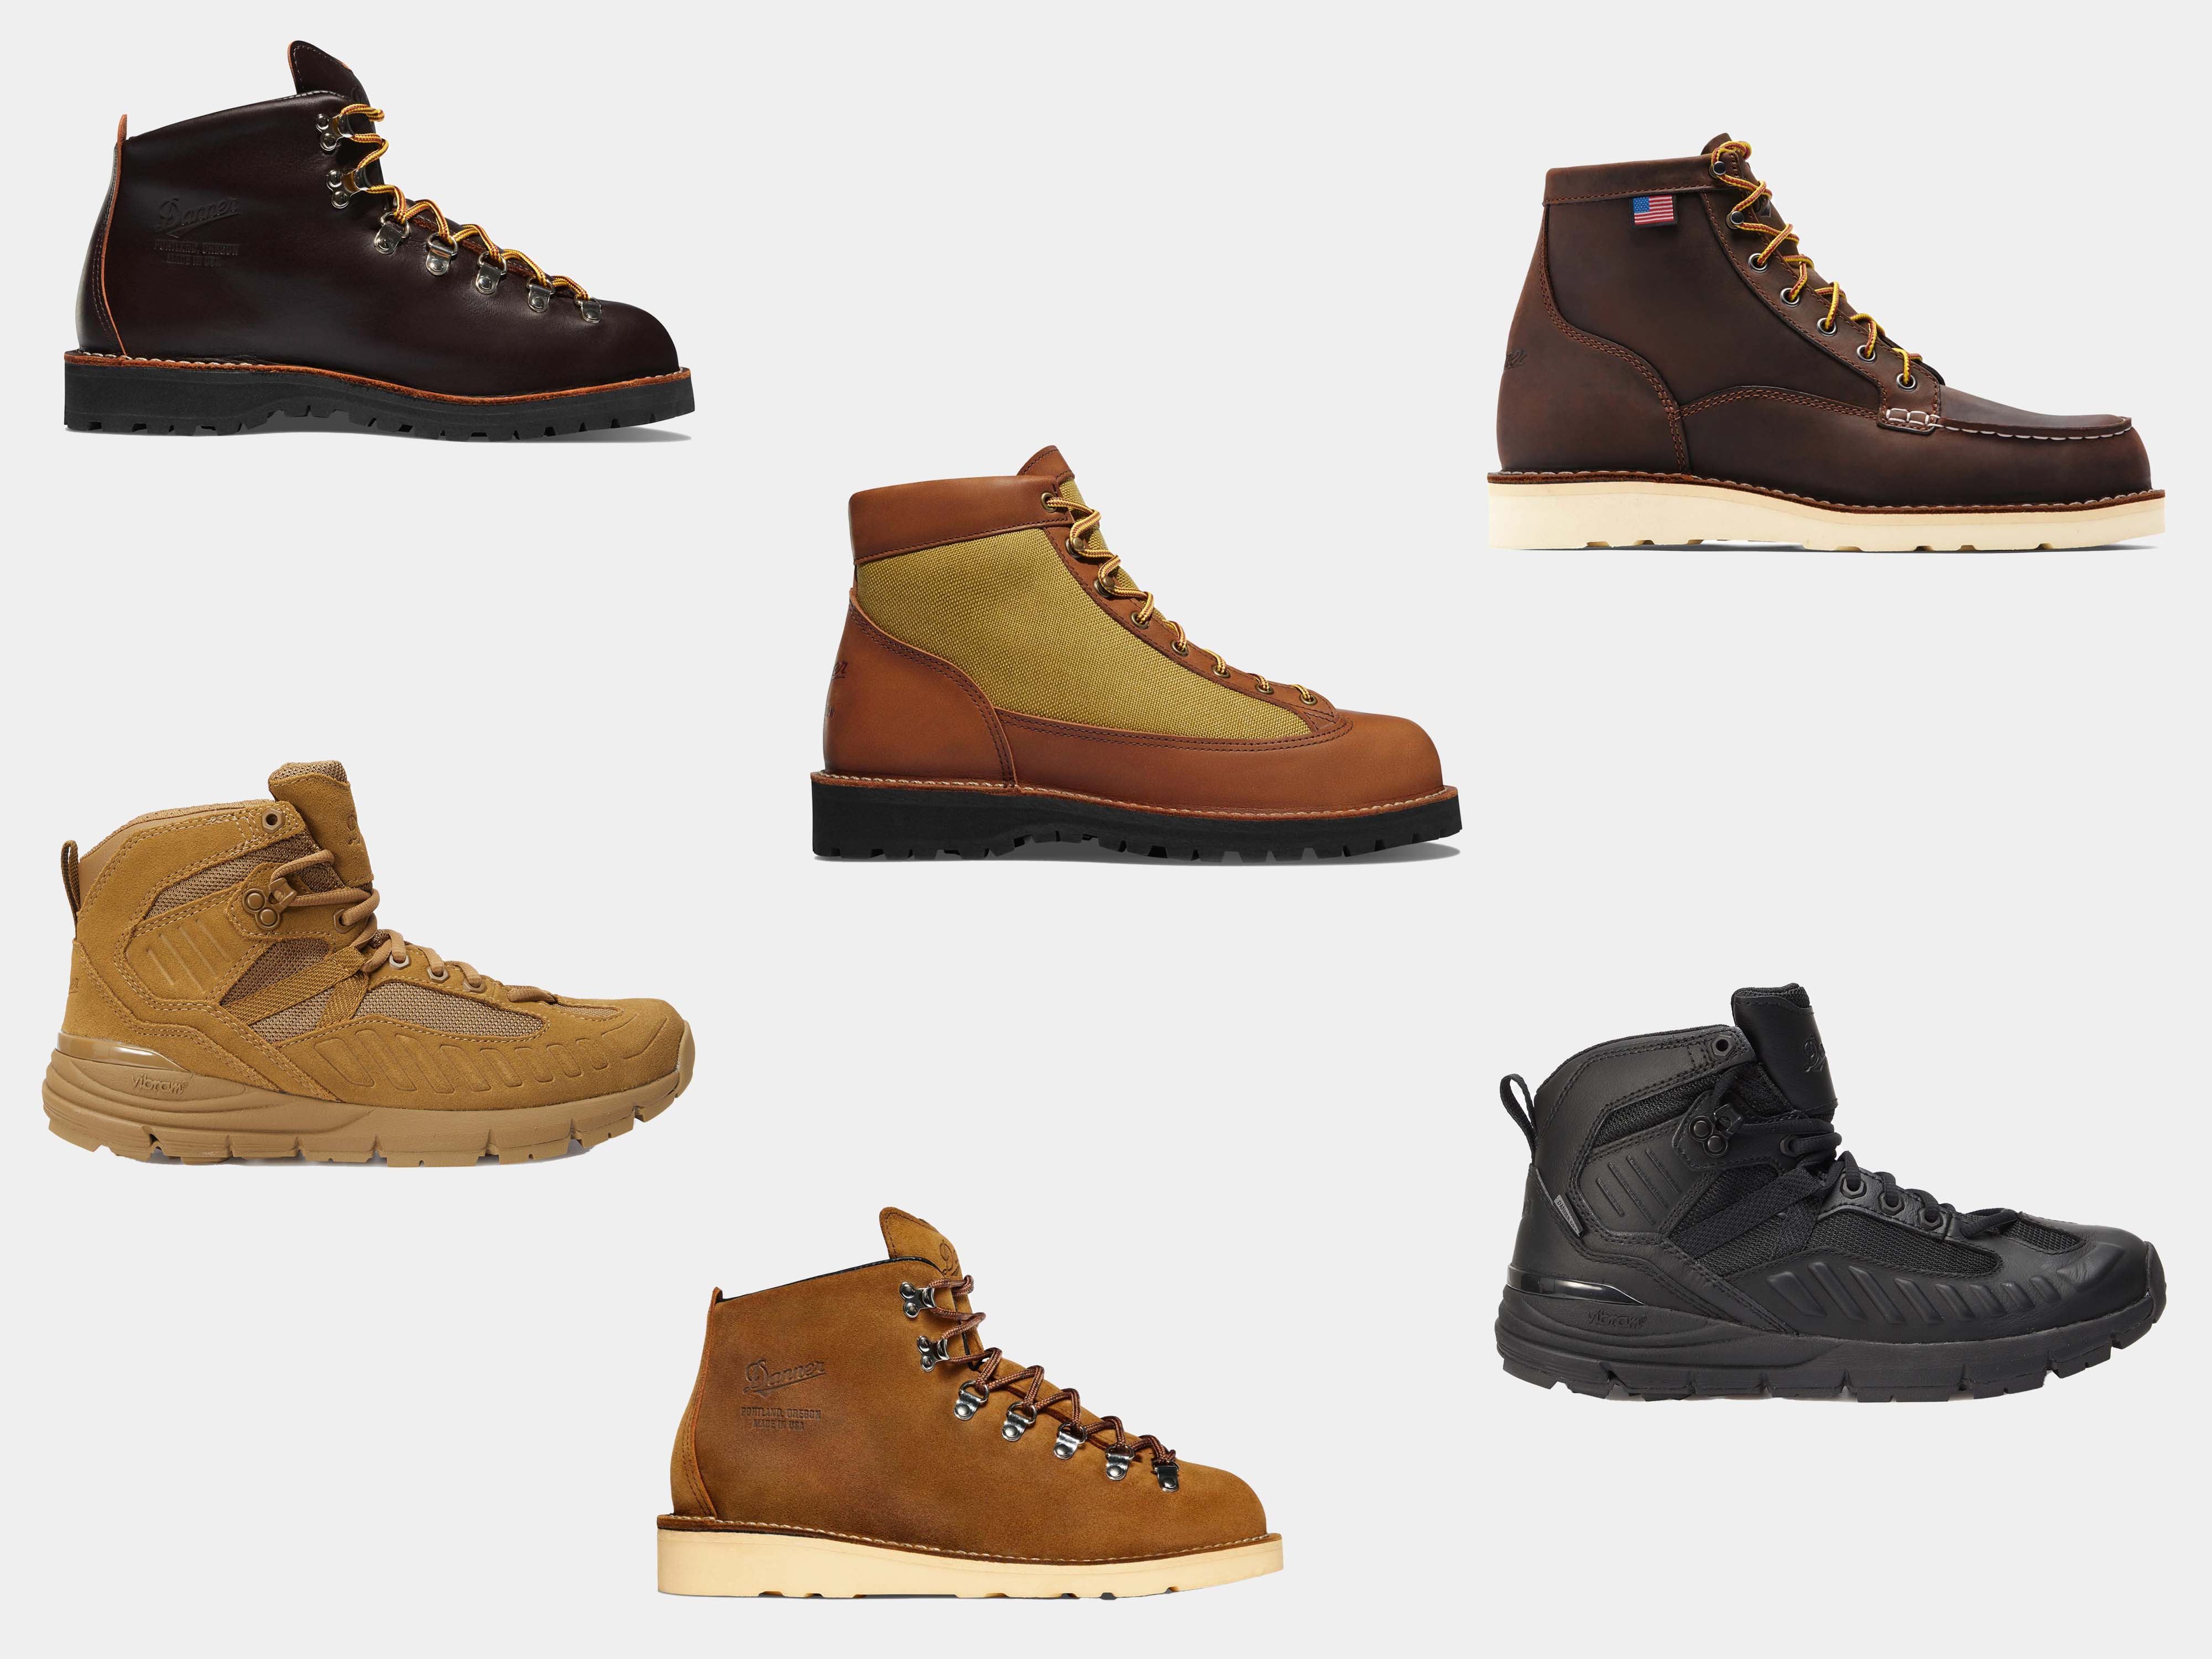 Danner Boots at CULTIZM | Cultizm